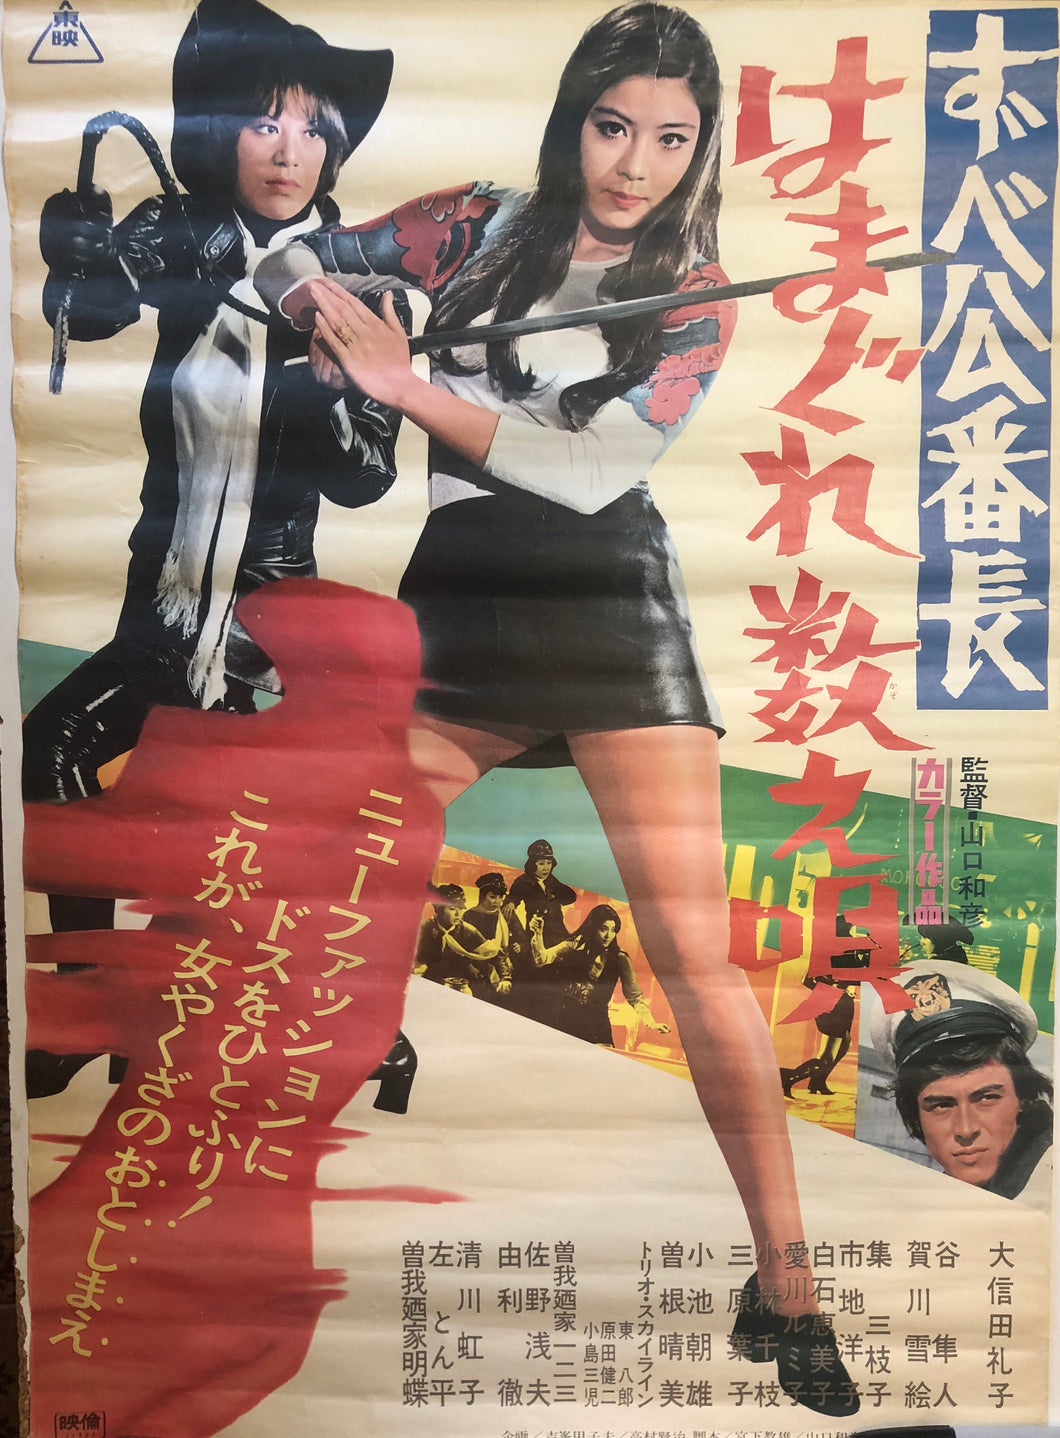 DELINQUENT GIRL BOSS - (USED) MOVIE POSTER